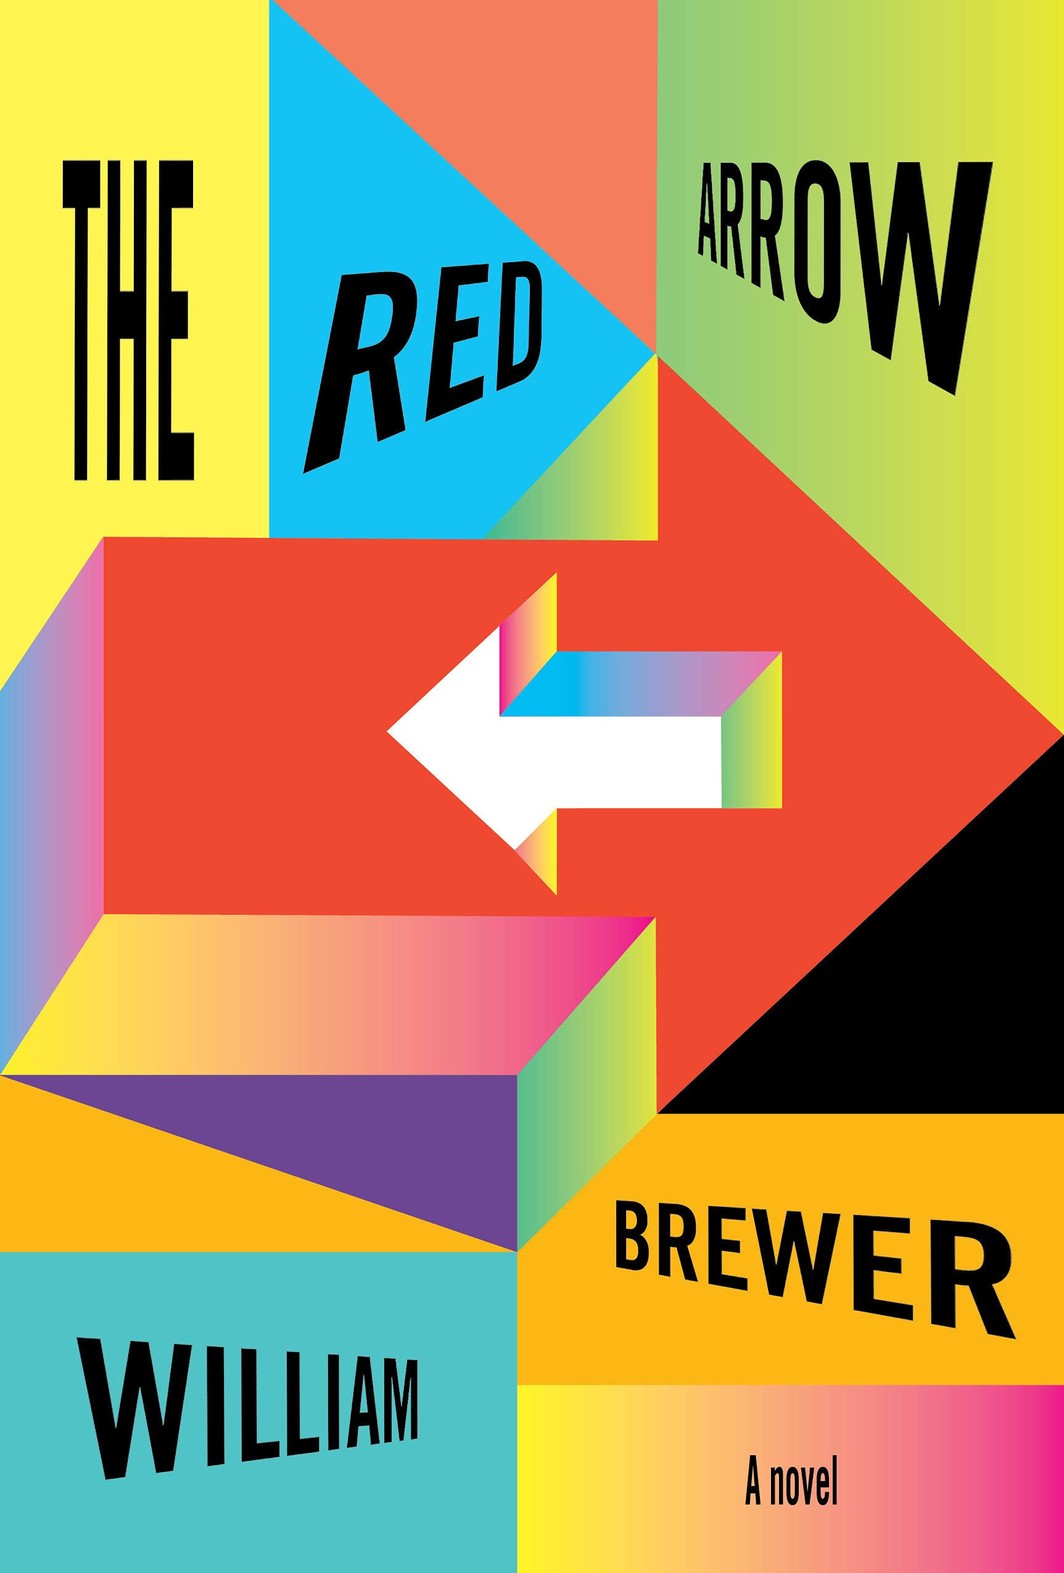 The cover of The Red Arrow